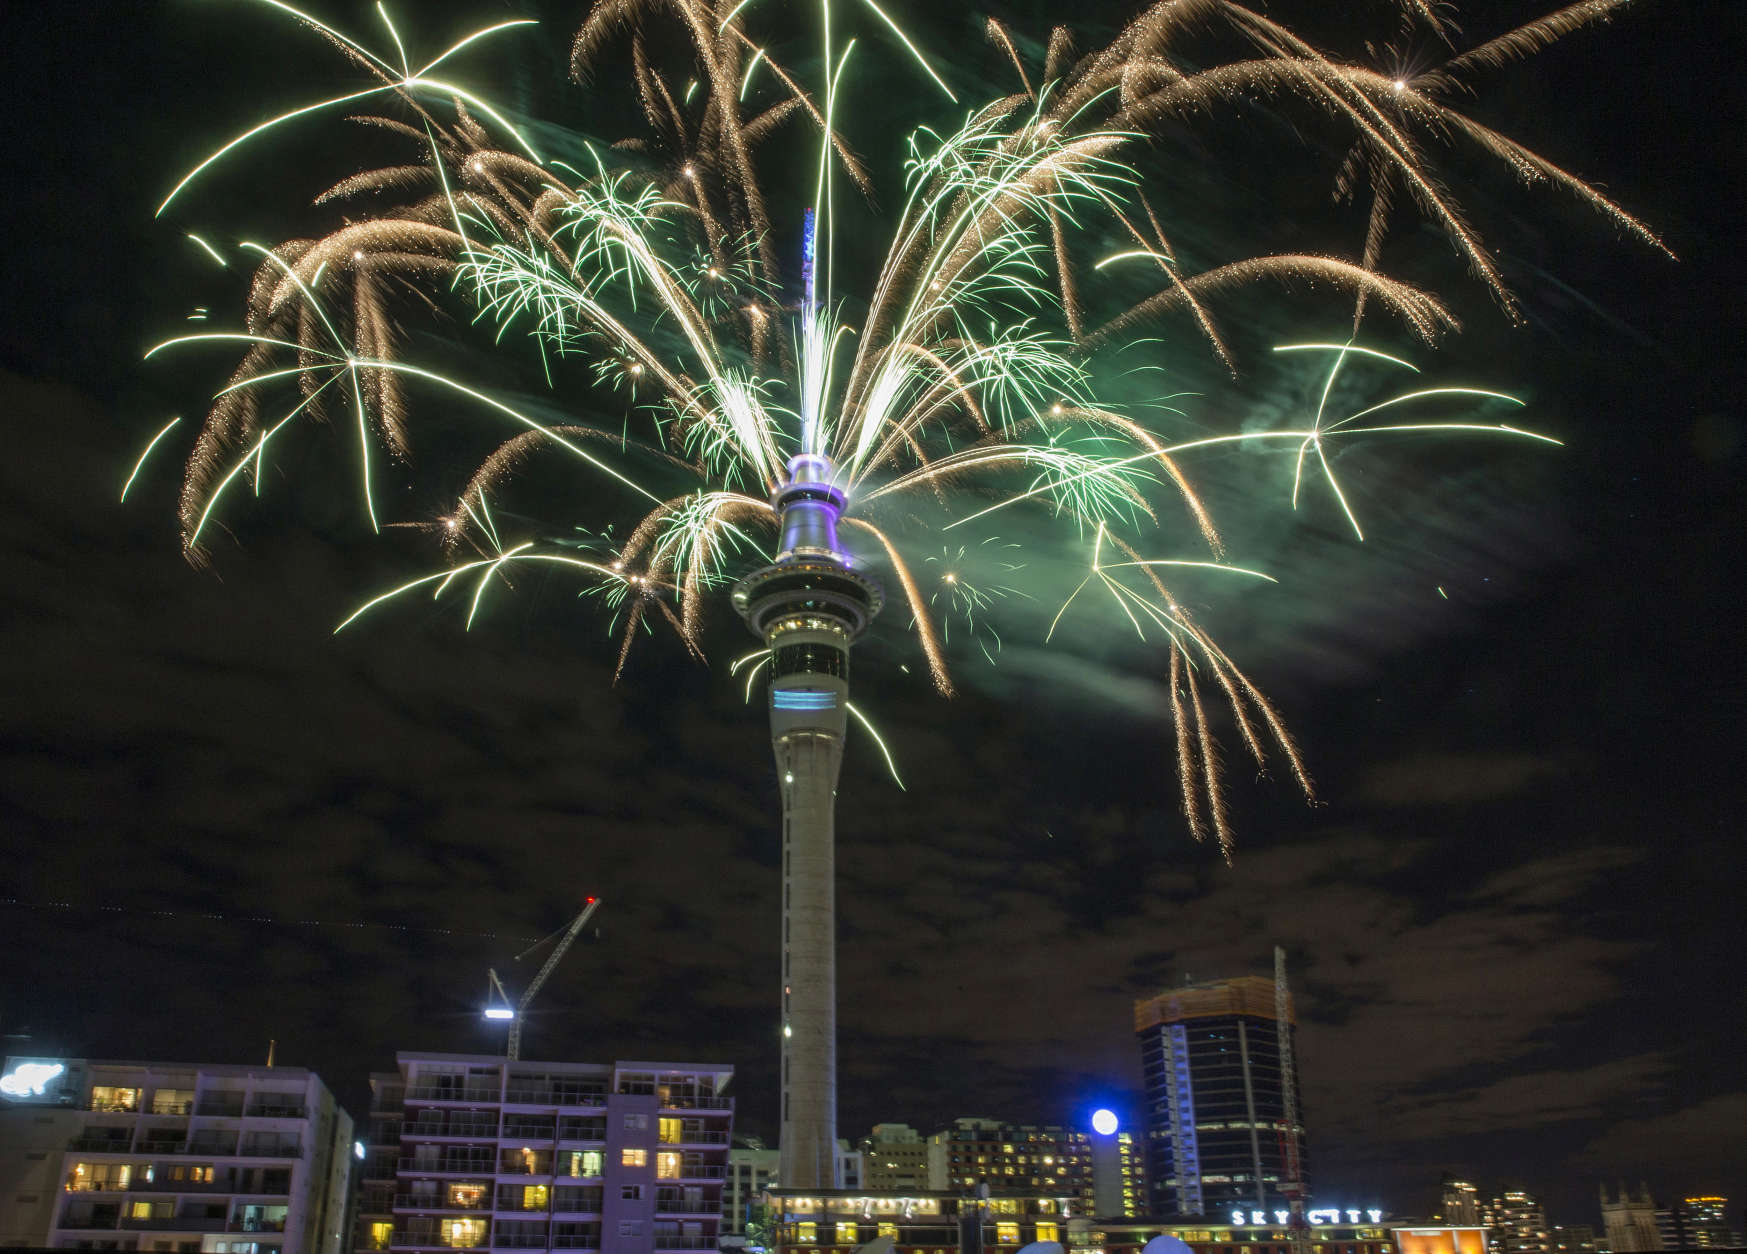 Fireworks explode off Auckland's Sky Tower as the new year is welcomed to New Zealand, Jan 1, 2017. (Peter Meecham/New Zealand Herald via AP)